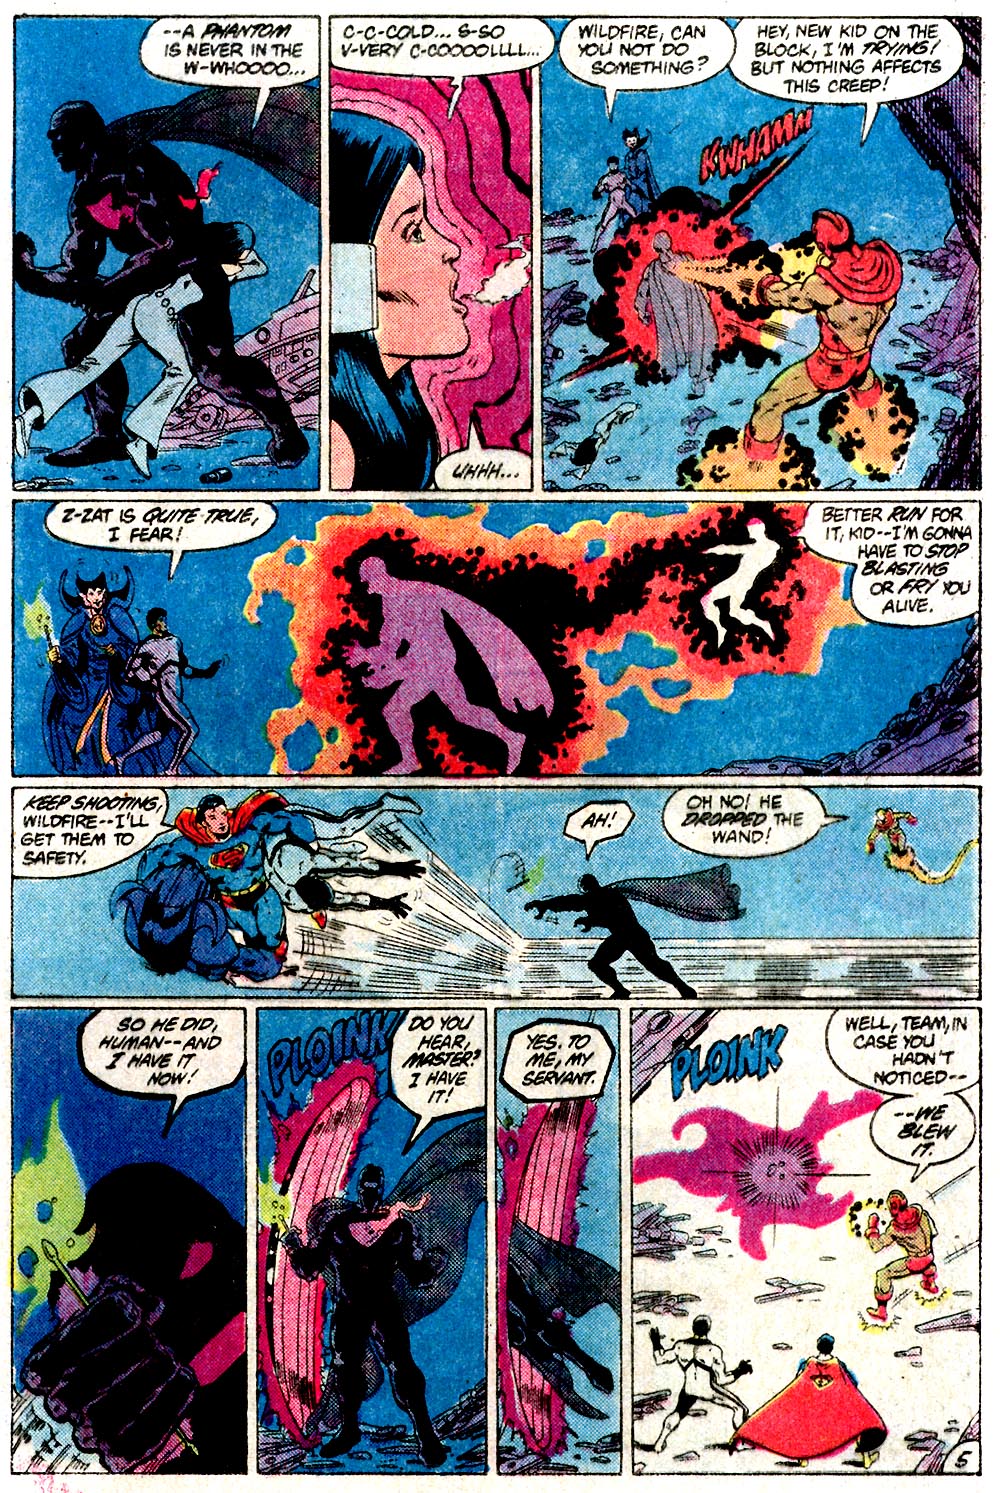 Legion of Super-Heroes (1980) 290 Page 5